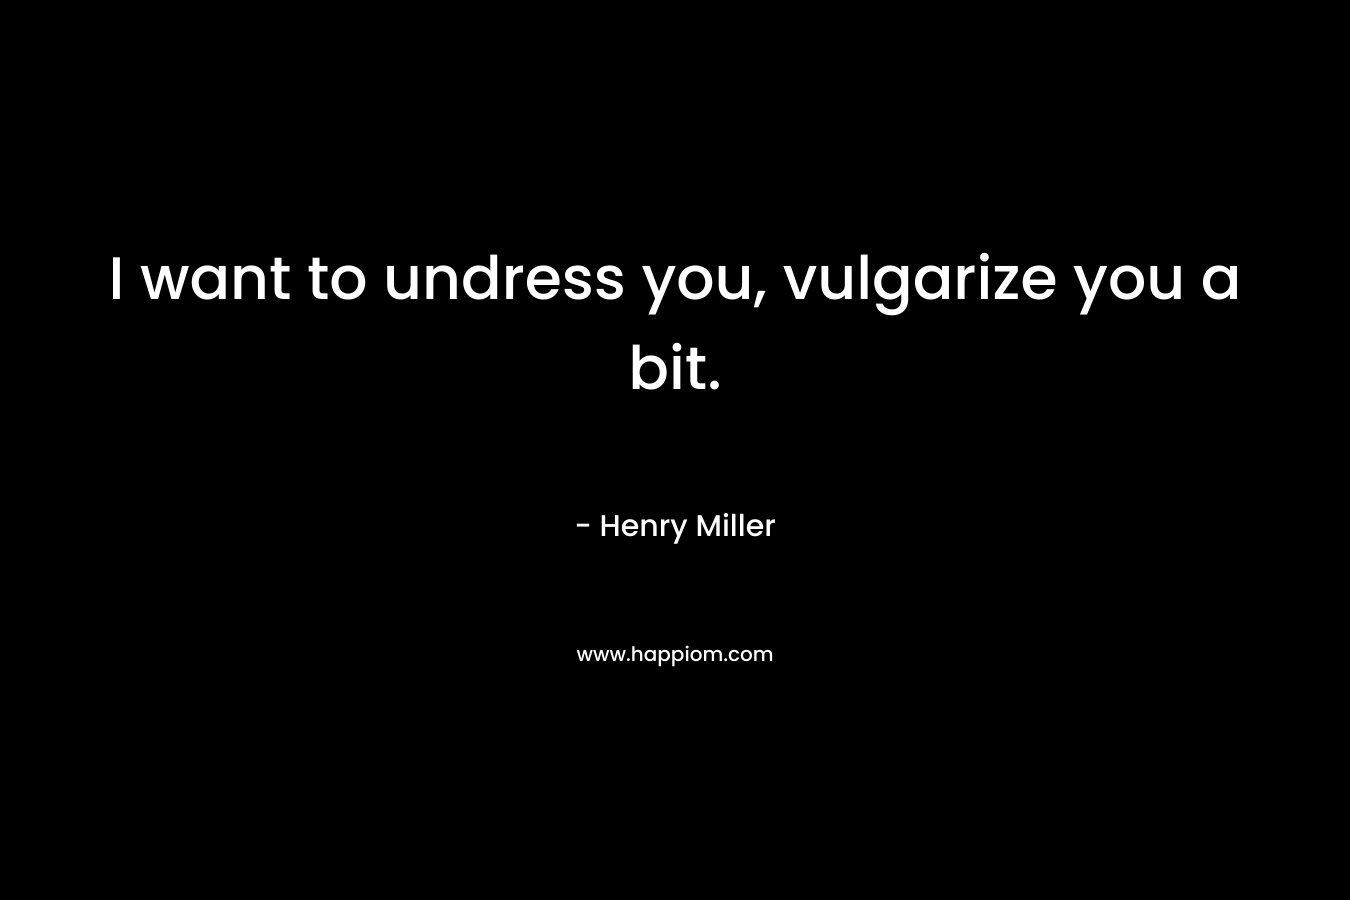 I want to undress you, vulgarize you a bit. – Henry Miller